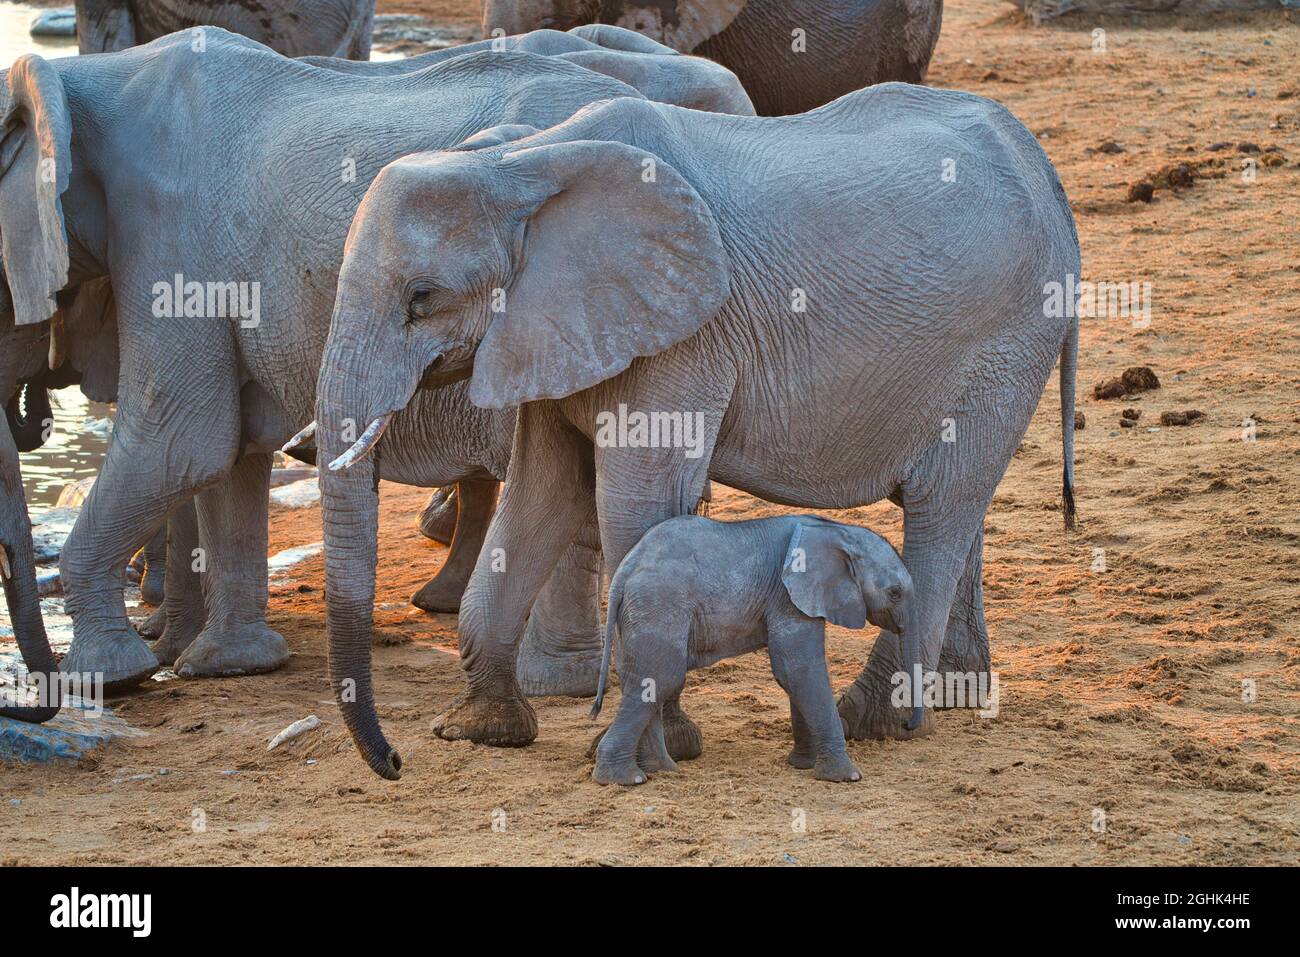 There are baby elephants and adult elephants at the water pool. Grey fur Lifestyle of various wild animals in Etosha National Park. Namibia. South Afr Stock Photo